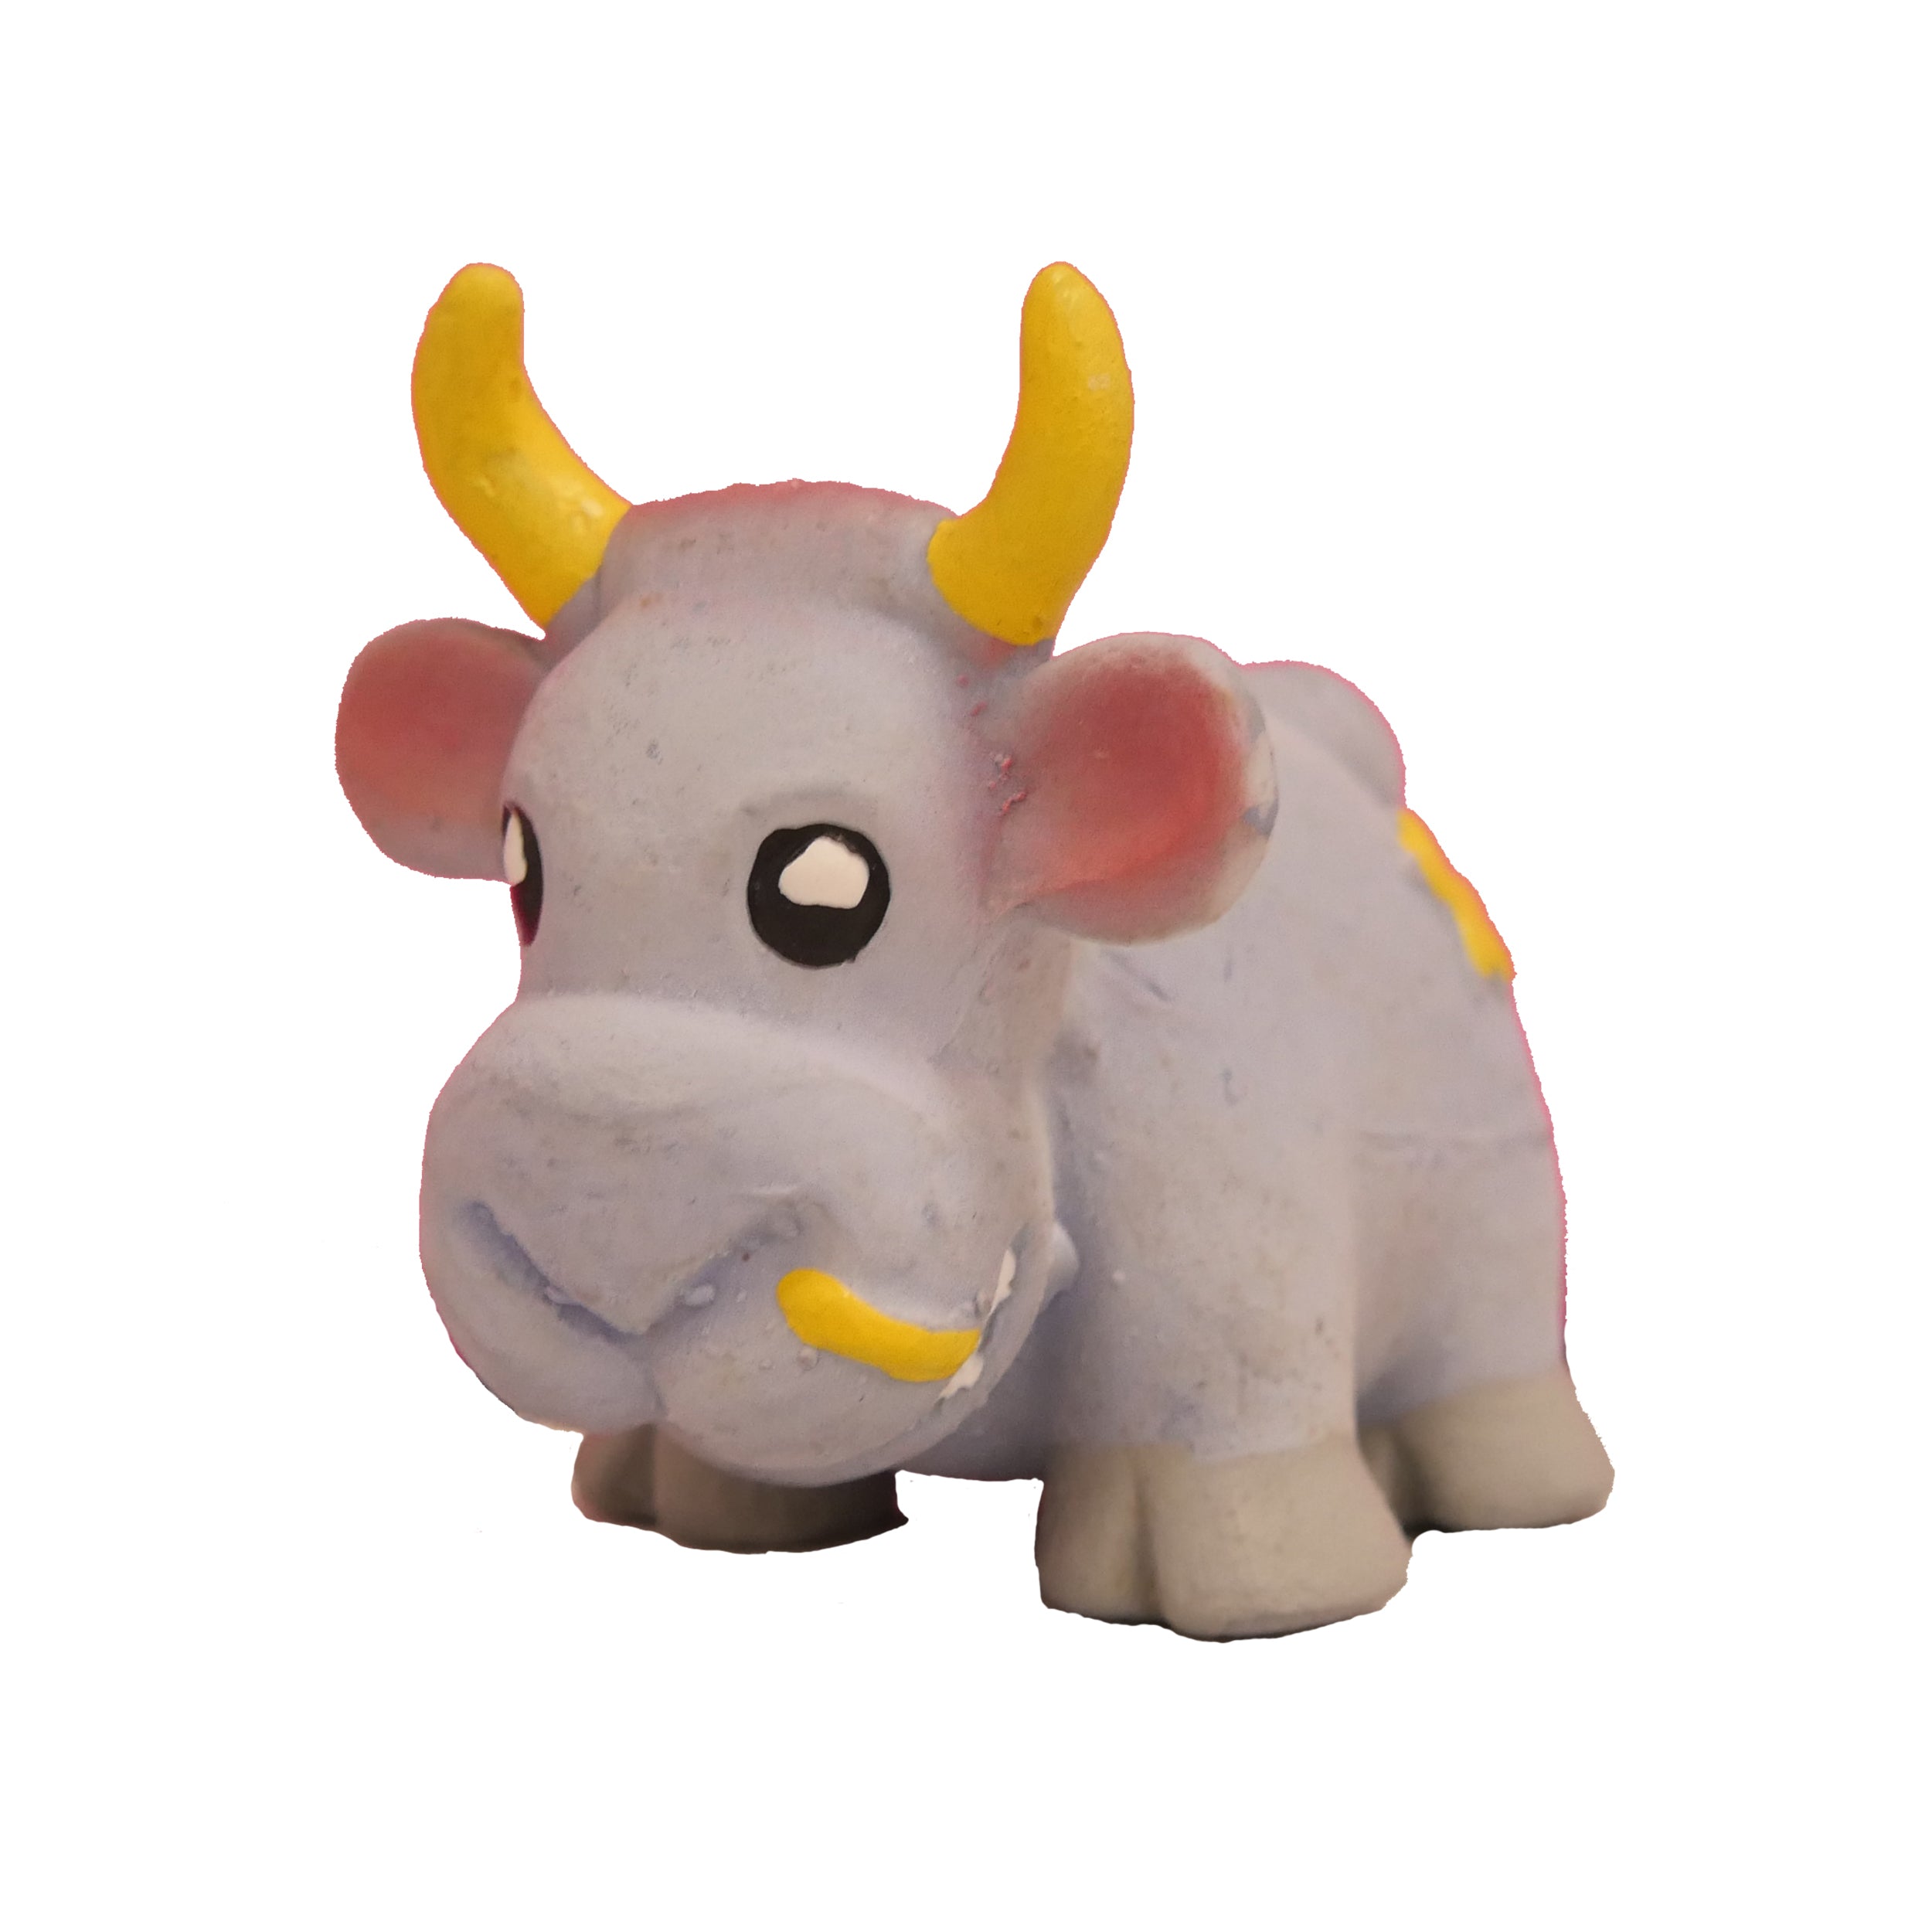 [Dog toy] Grey Rubber Cow With Star Toy